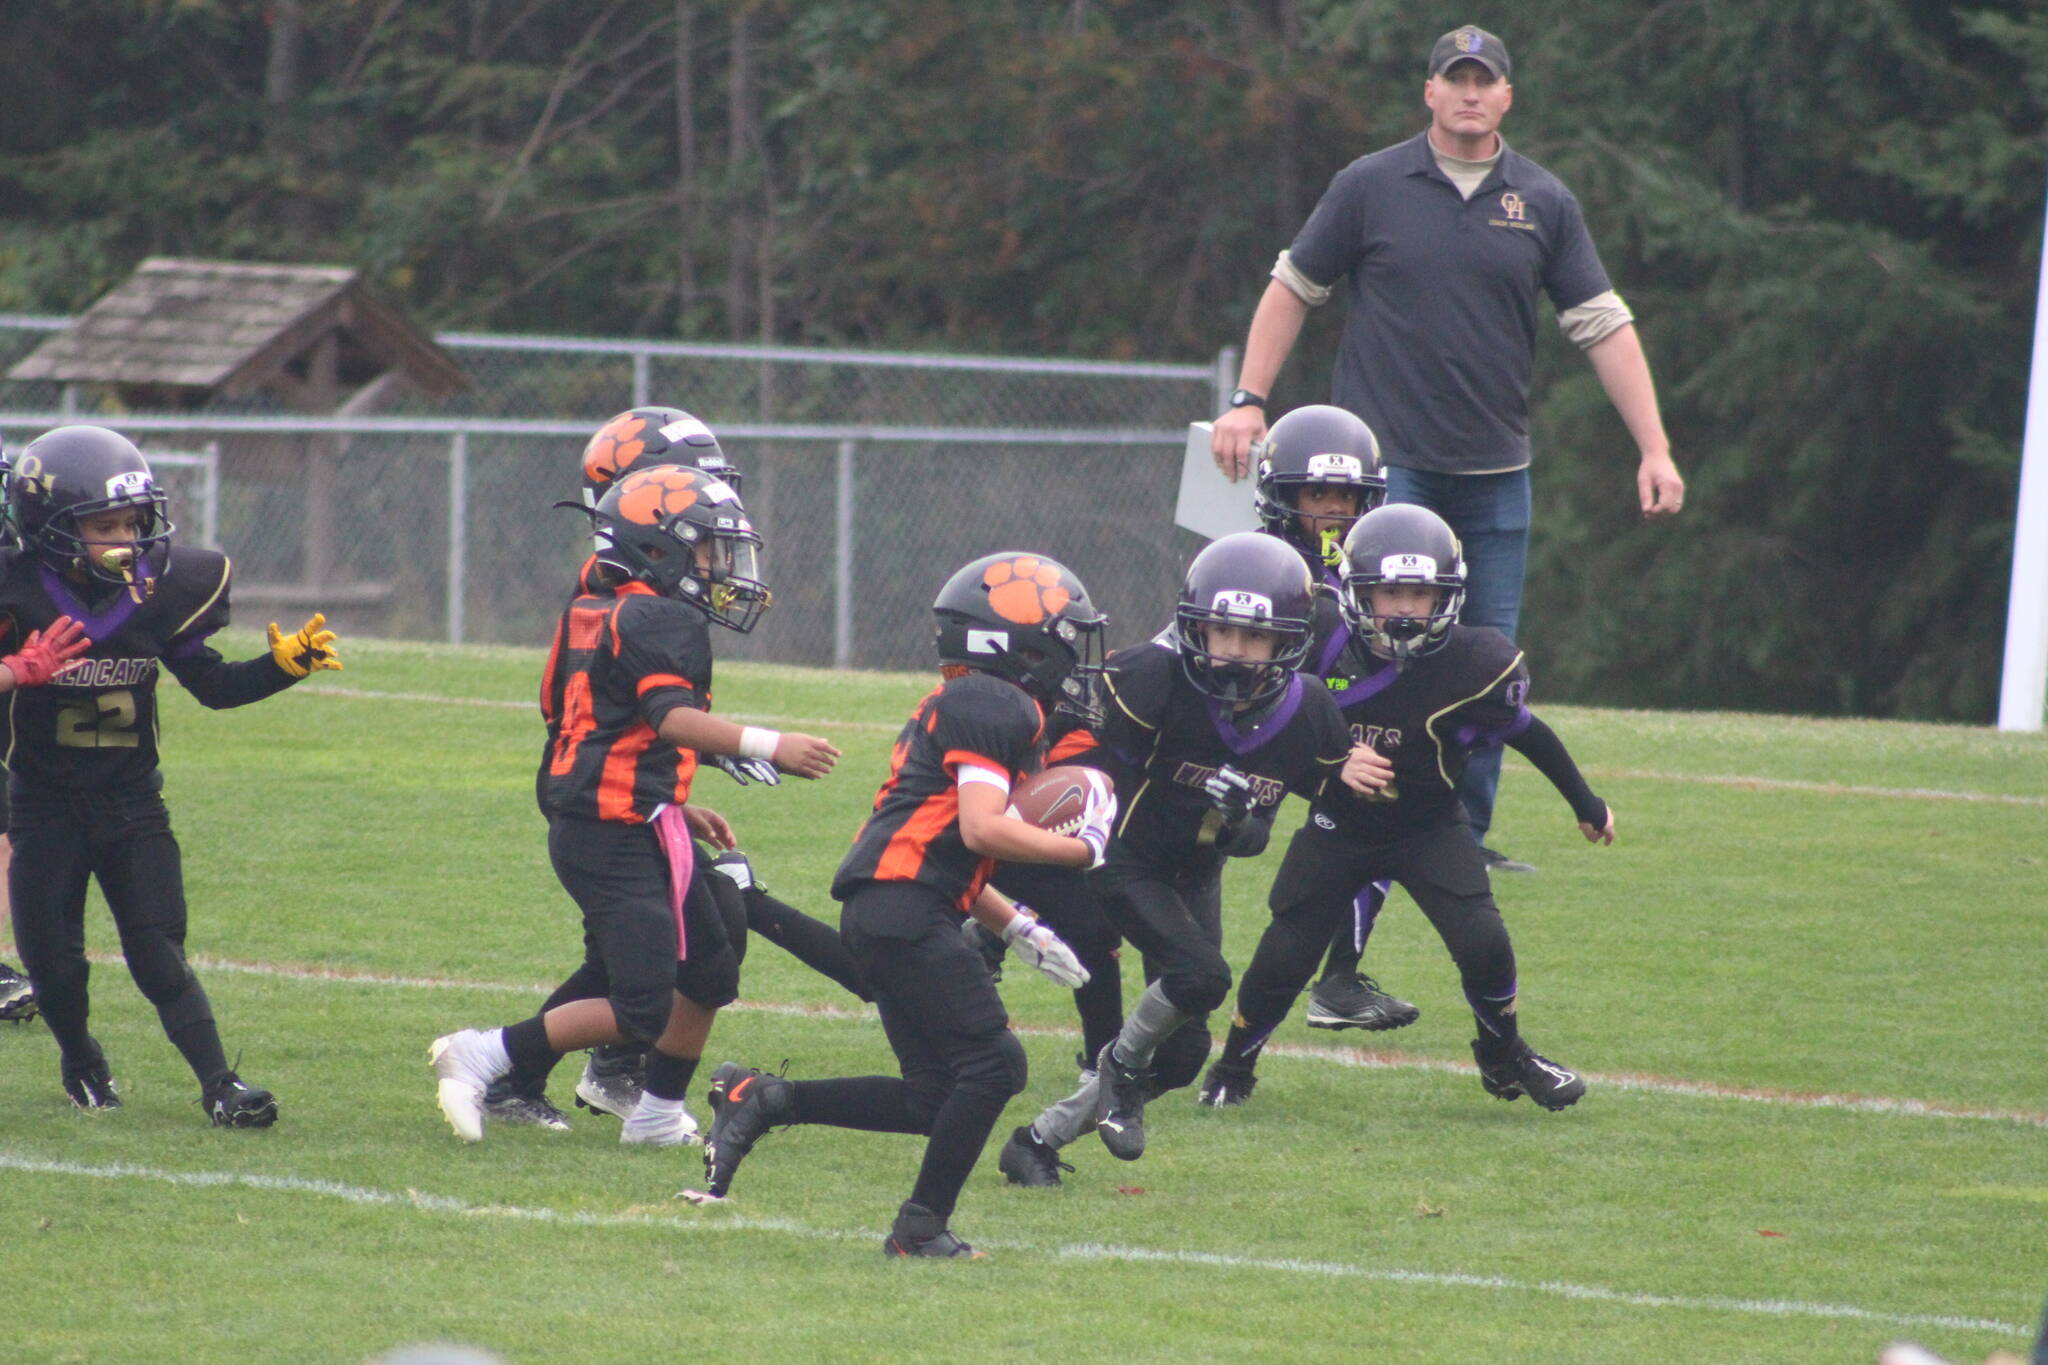 Heather Spaulding \ Staff photo
Pee Wees run to make a touchdown.